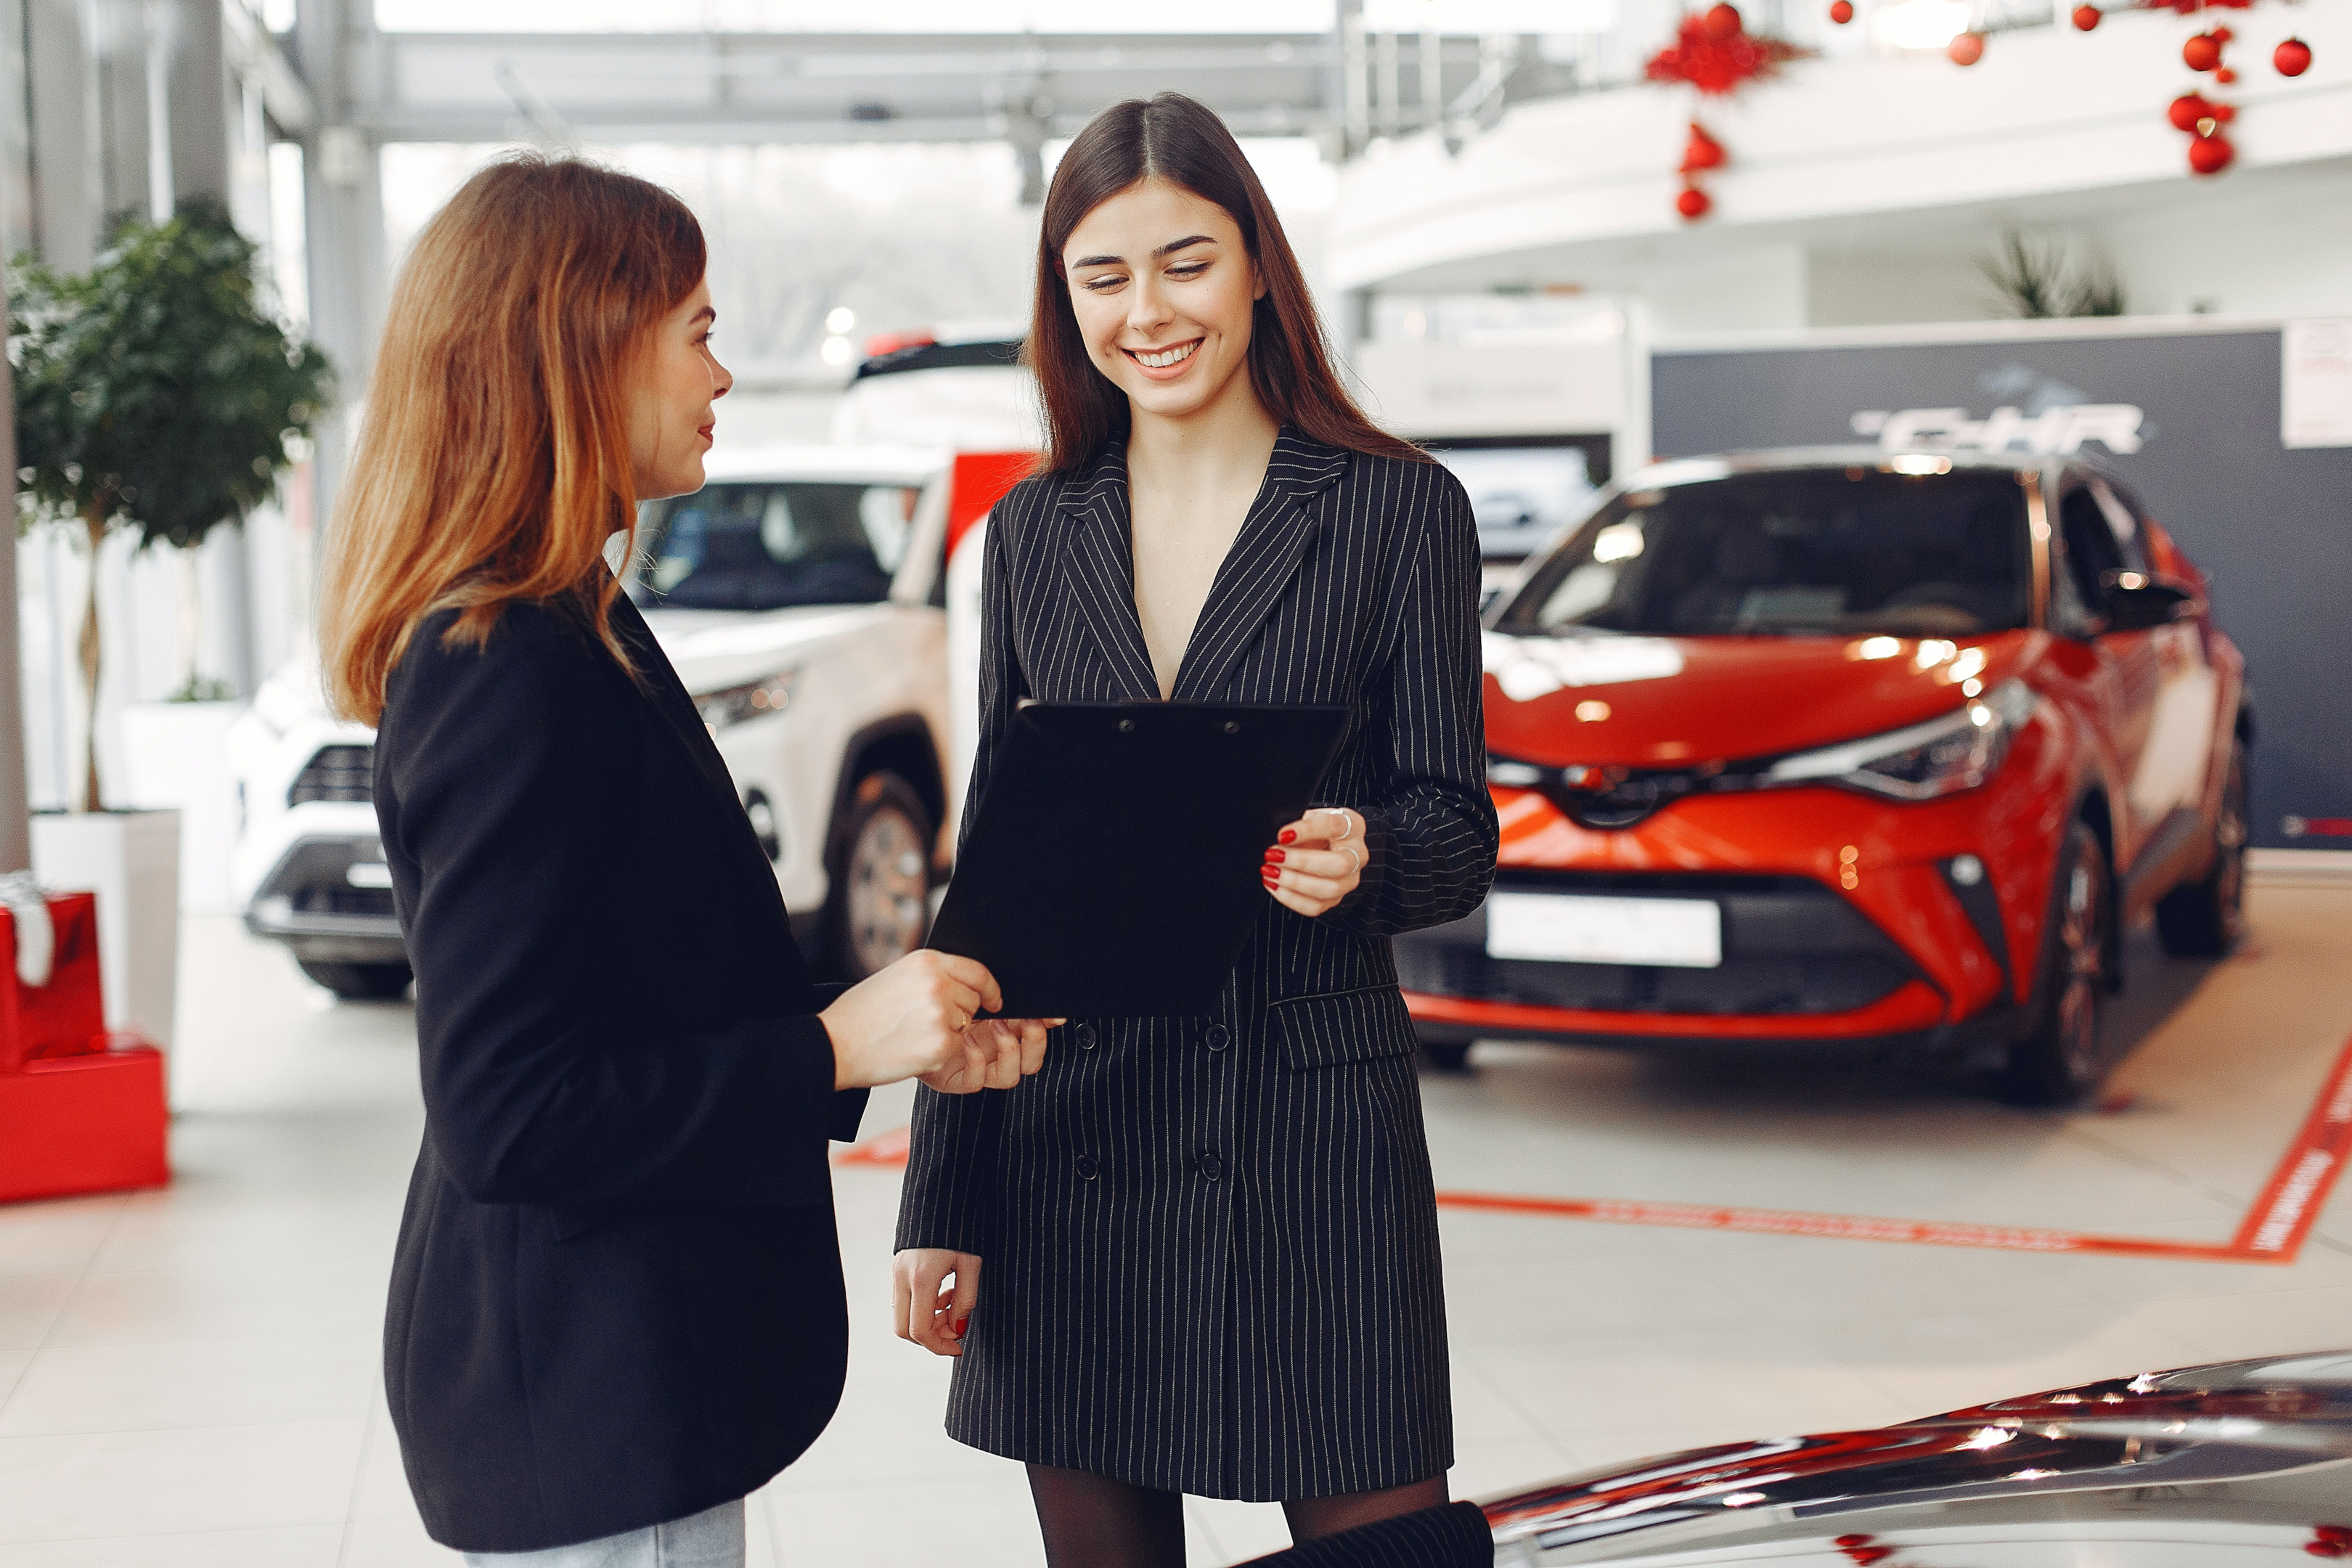 Talk about all the processes of buying and selling cars.